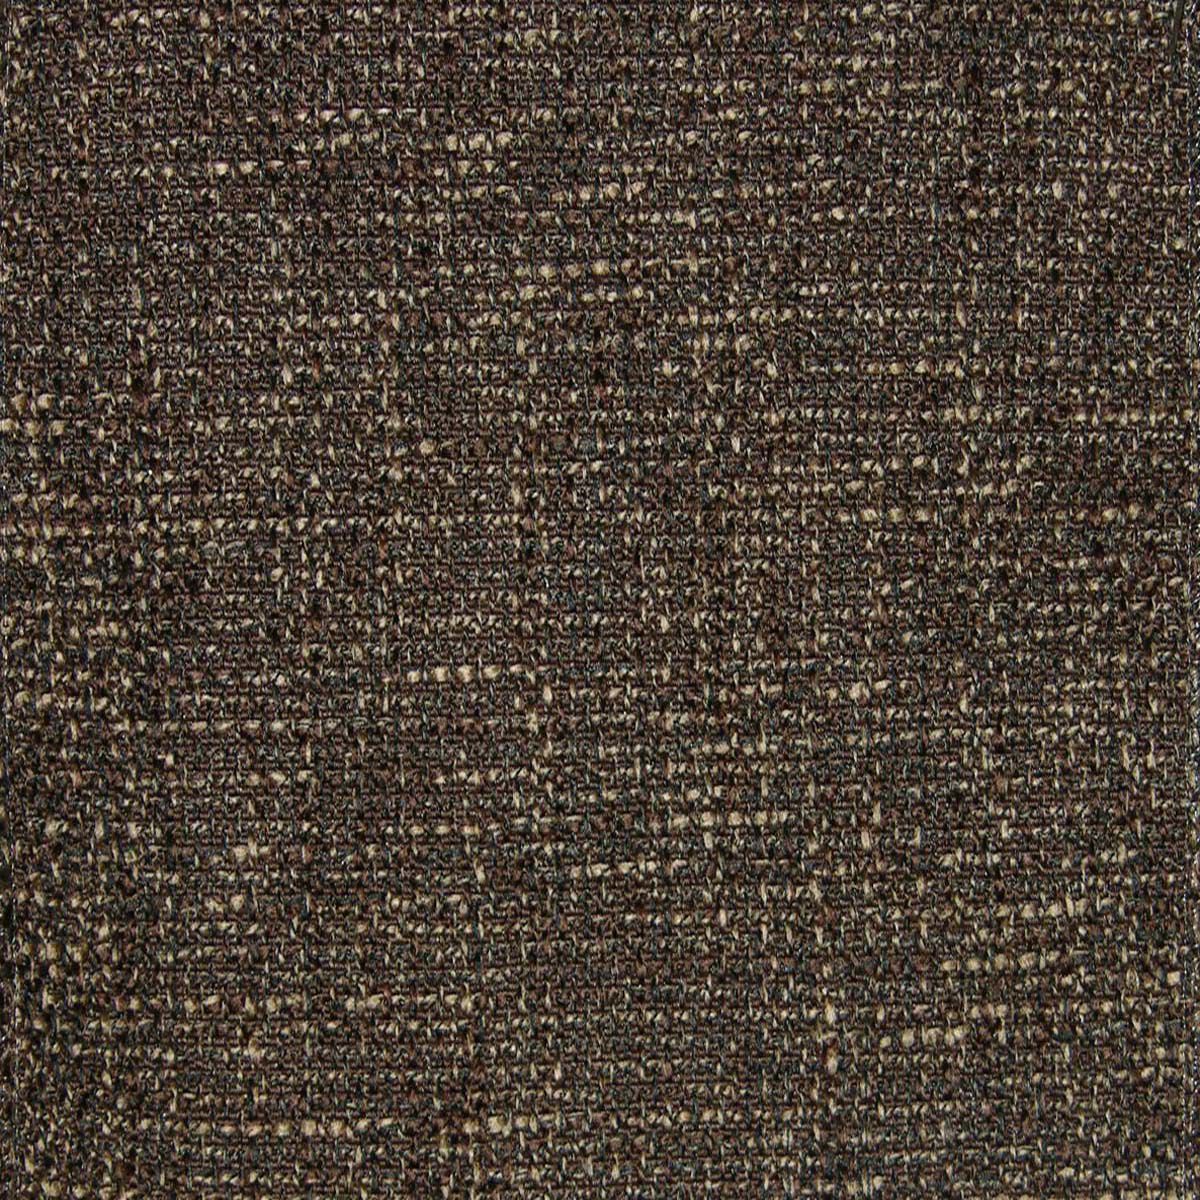 Colbert fabric in chocolate brown color - pattern number HR 15483100 - by Scalamandre in the Old World Weavers collection